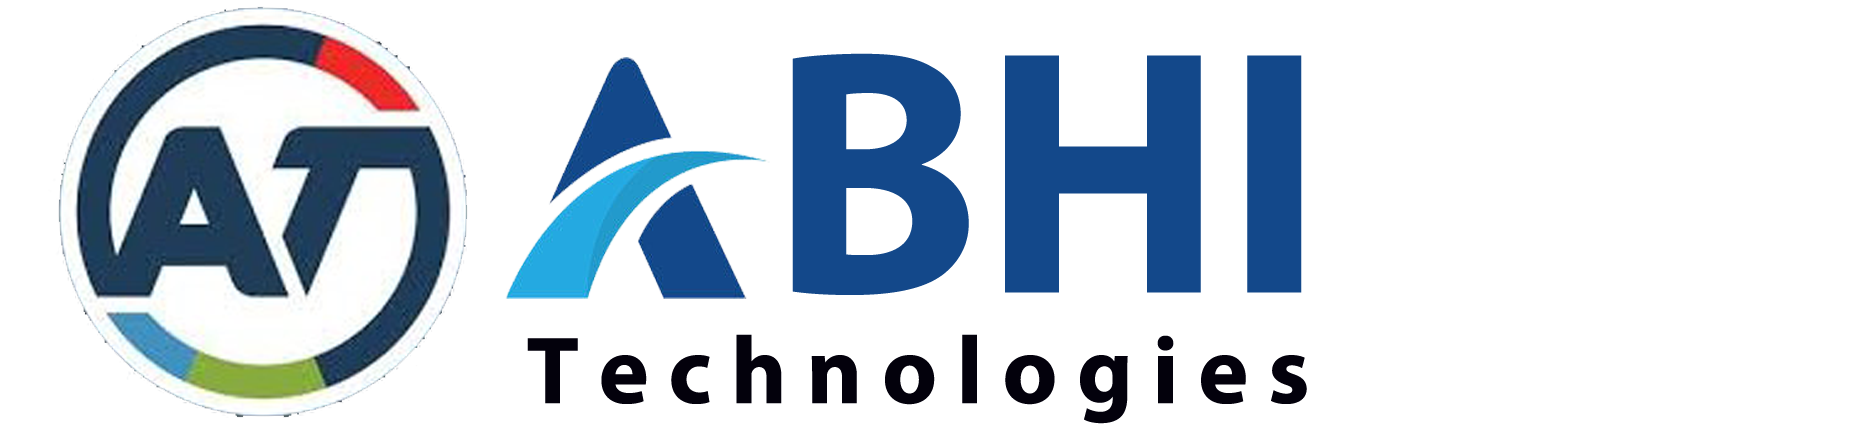 Sky Medical Technology | Joining forces with the Association of British  HealthTech Industries (ABHI)